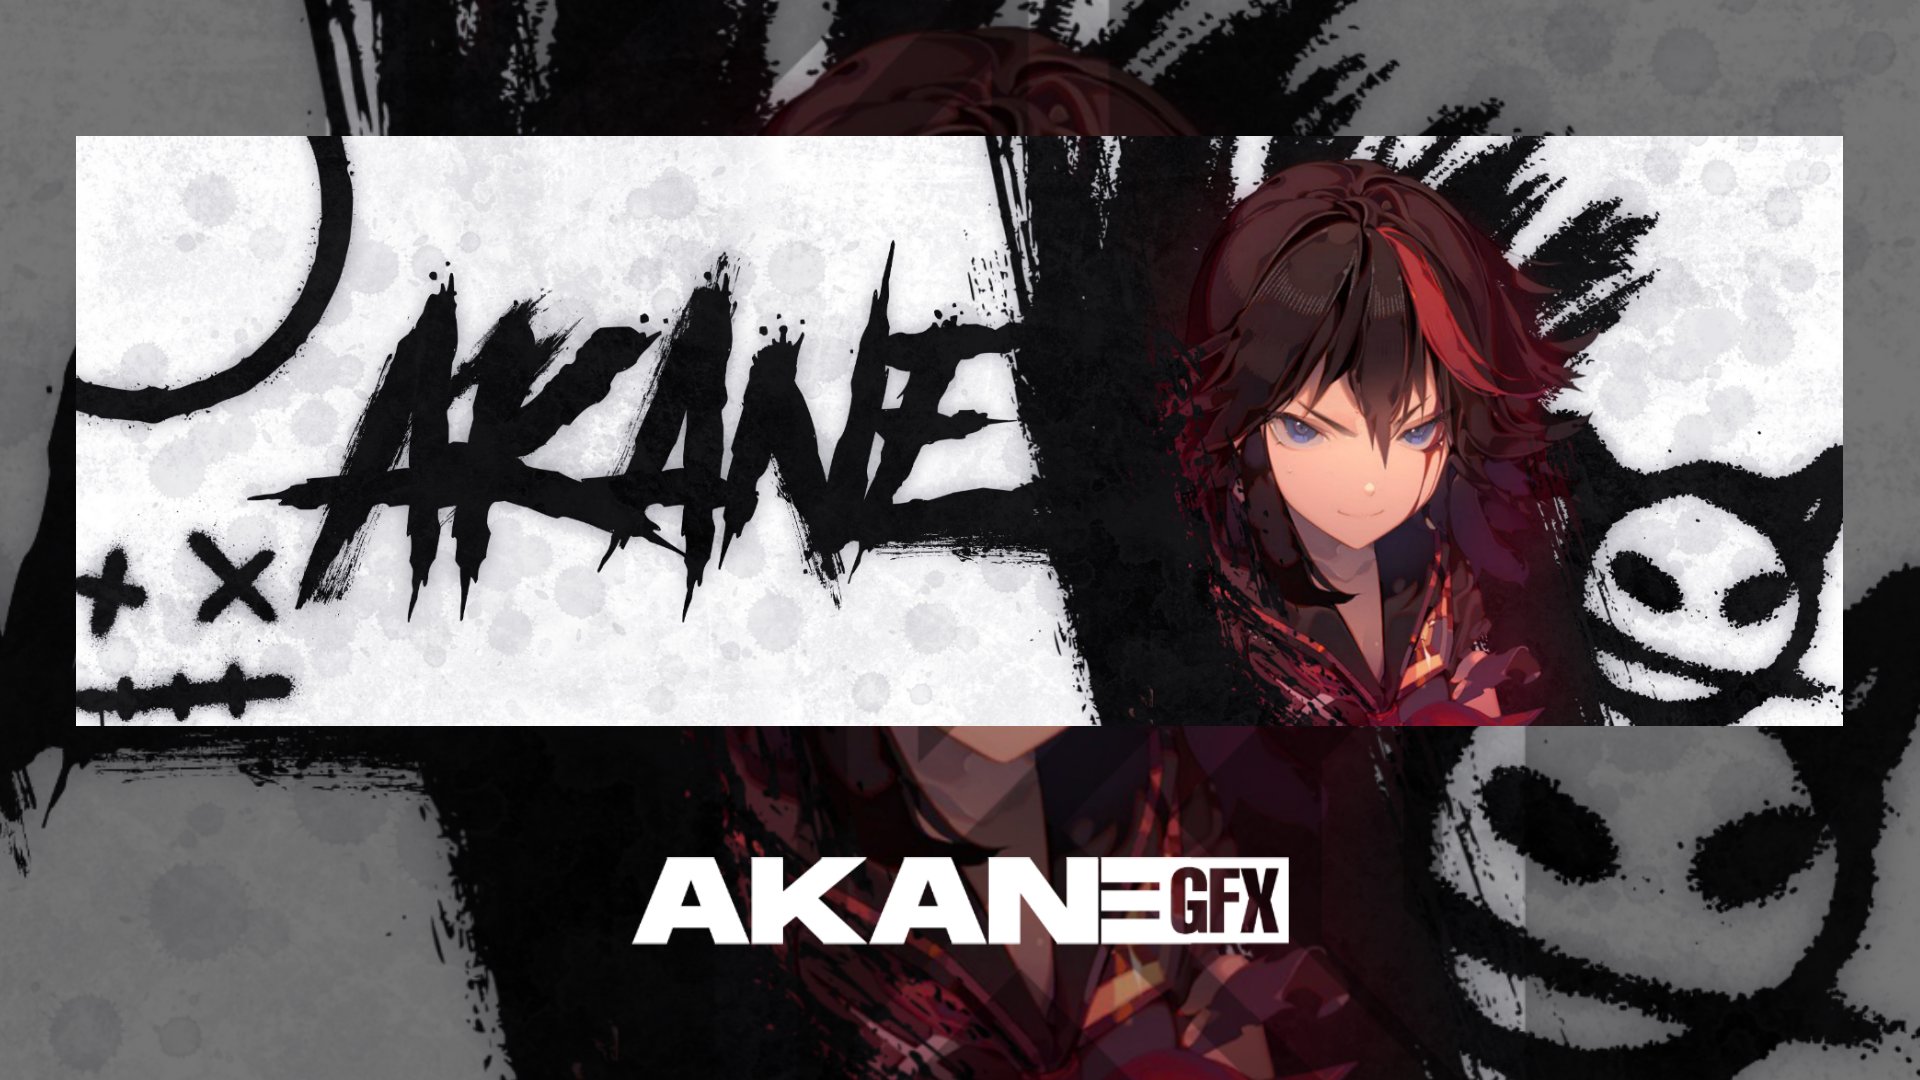 Yawn 乡 on Twitter Finish 131  Hekki  Another anime header for a  client whoishekki Likes and RTs are appreciated   Anime headers 10   httpstcoBvnI6KKRLC  Twitter